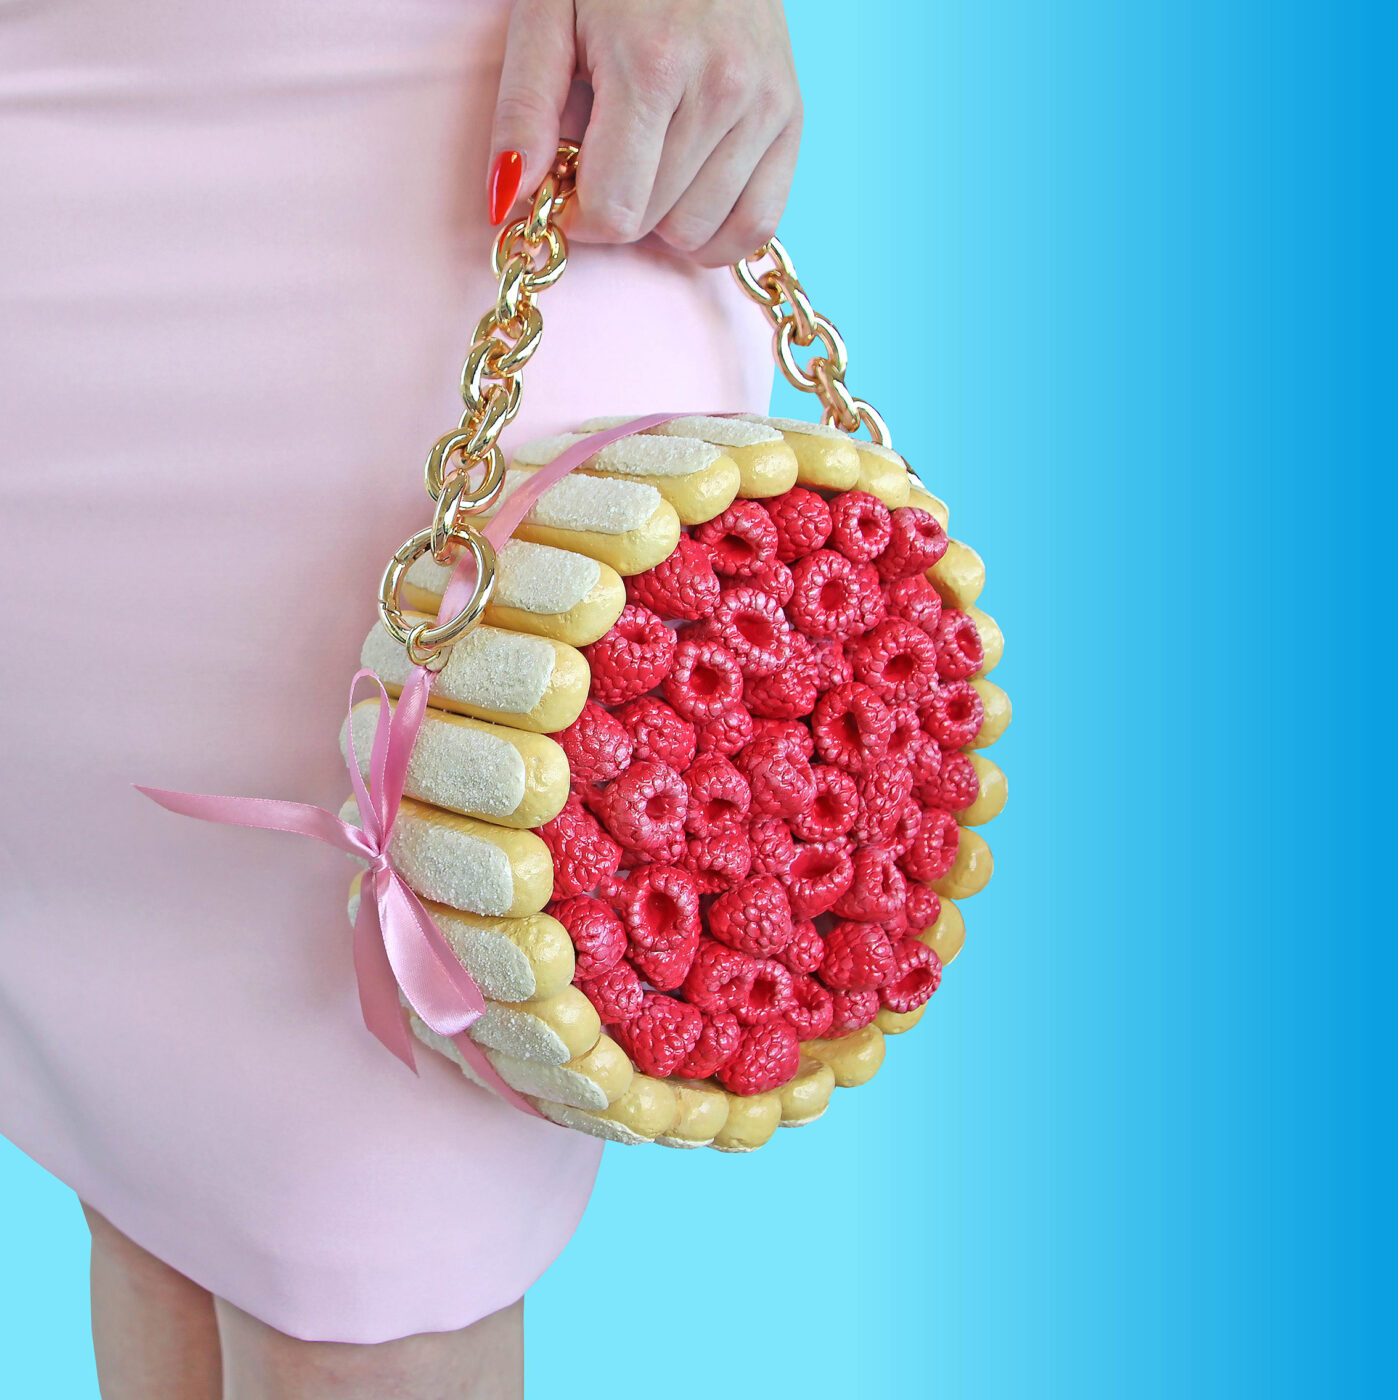 16 amazing bags that look exactly like food | CafeMom.com